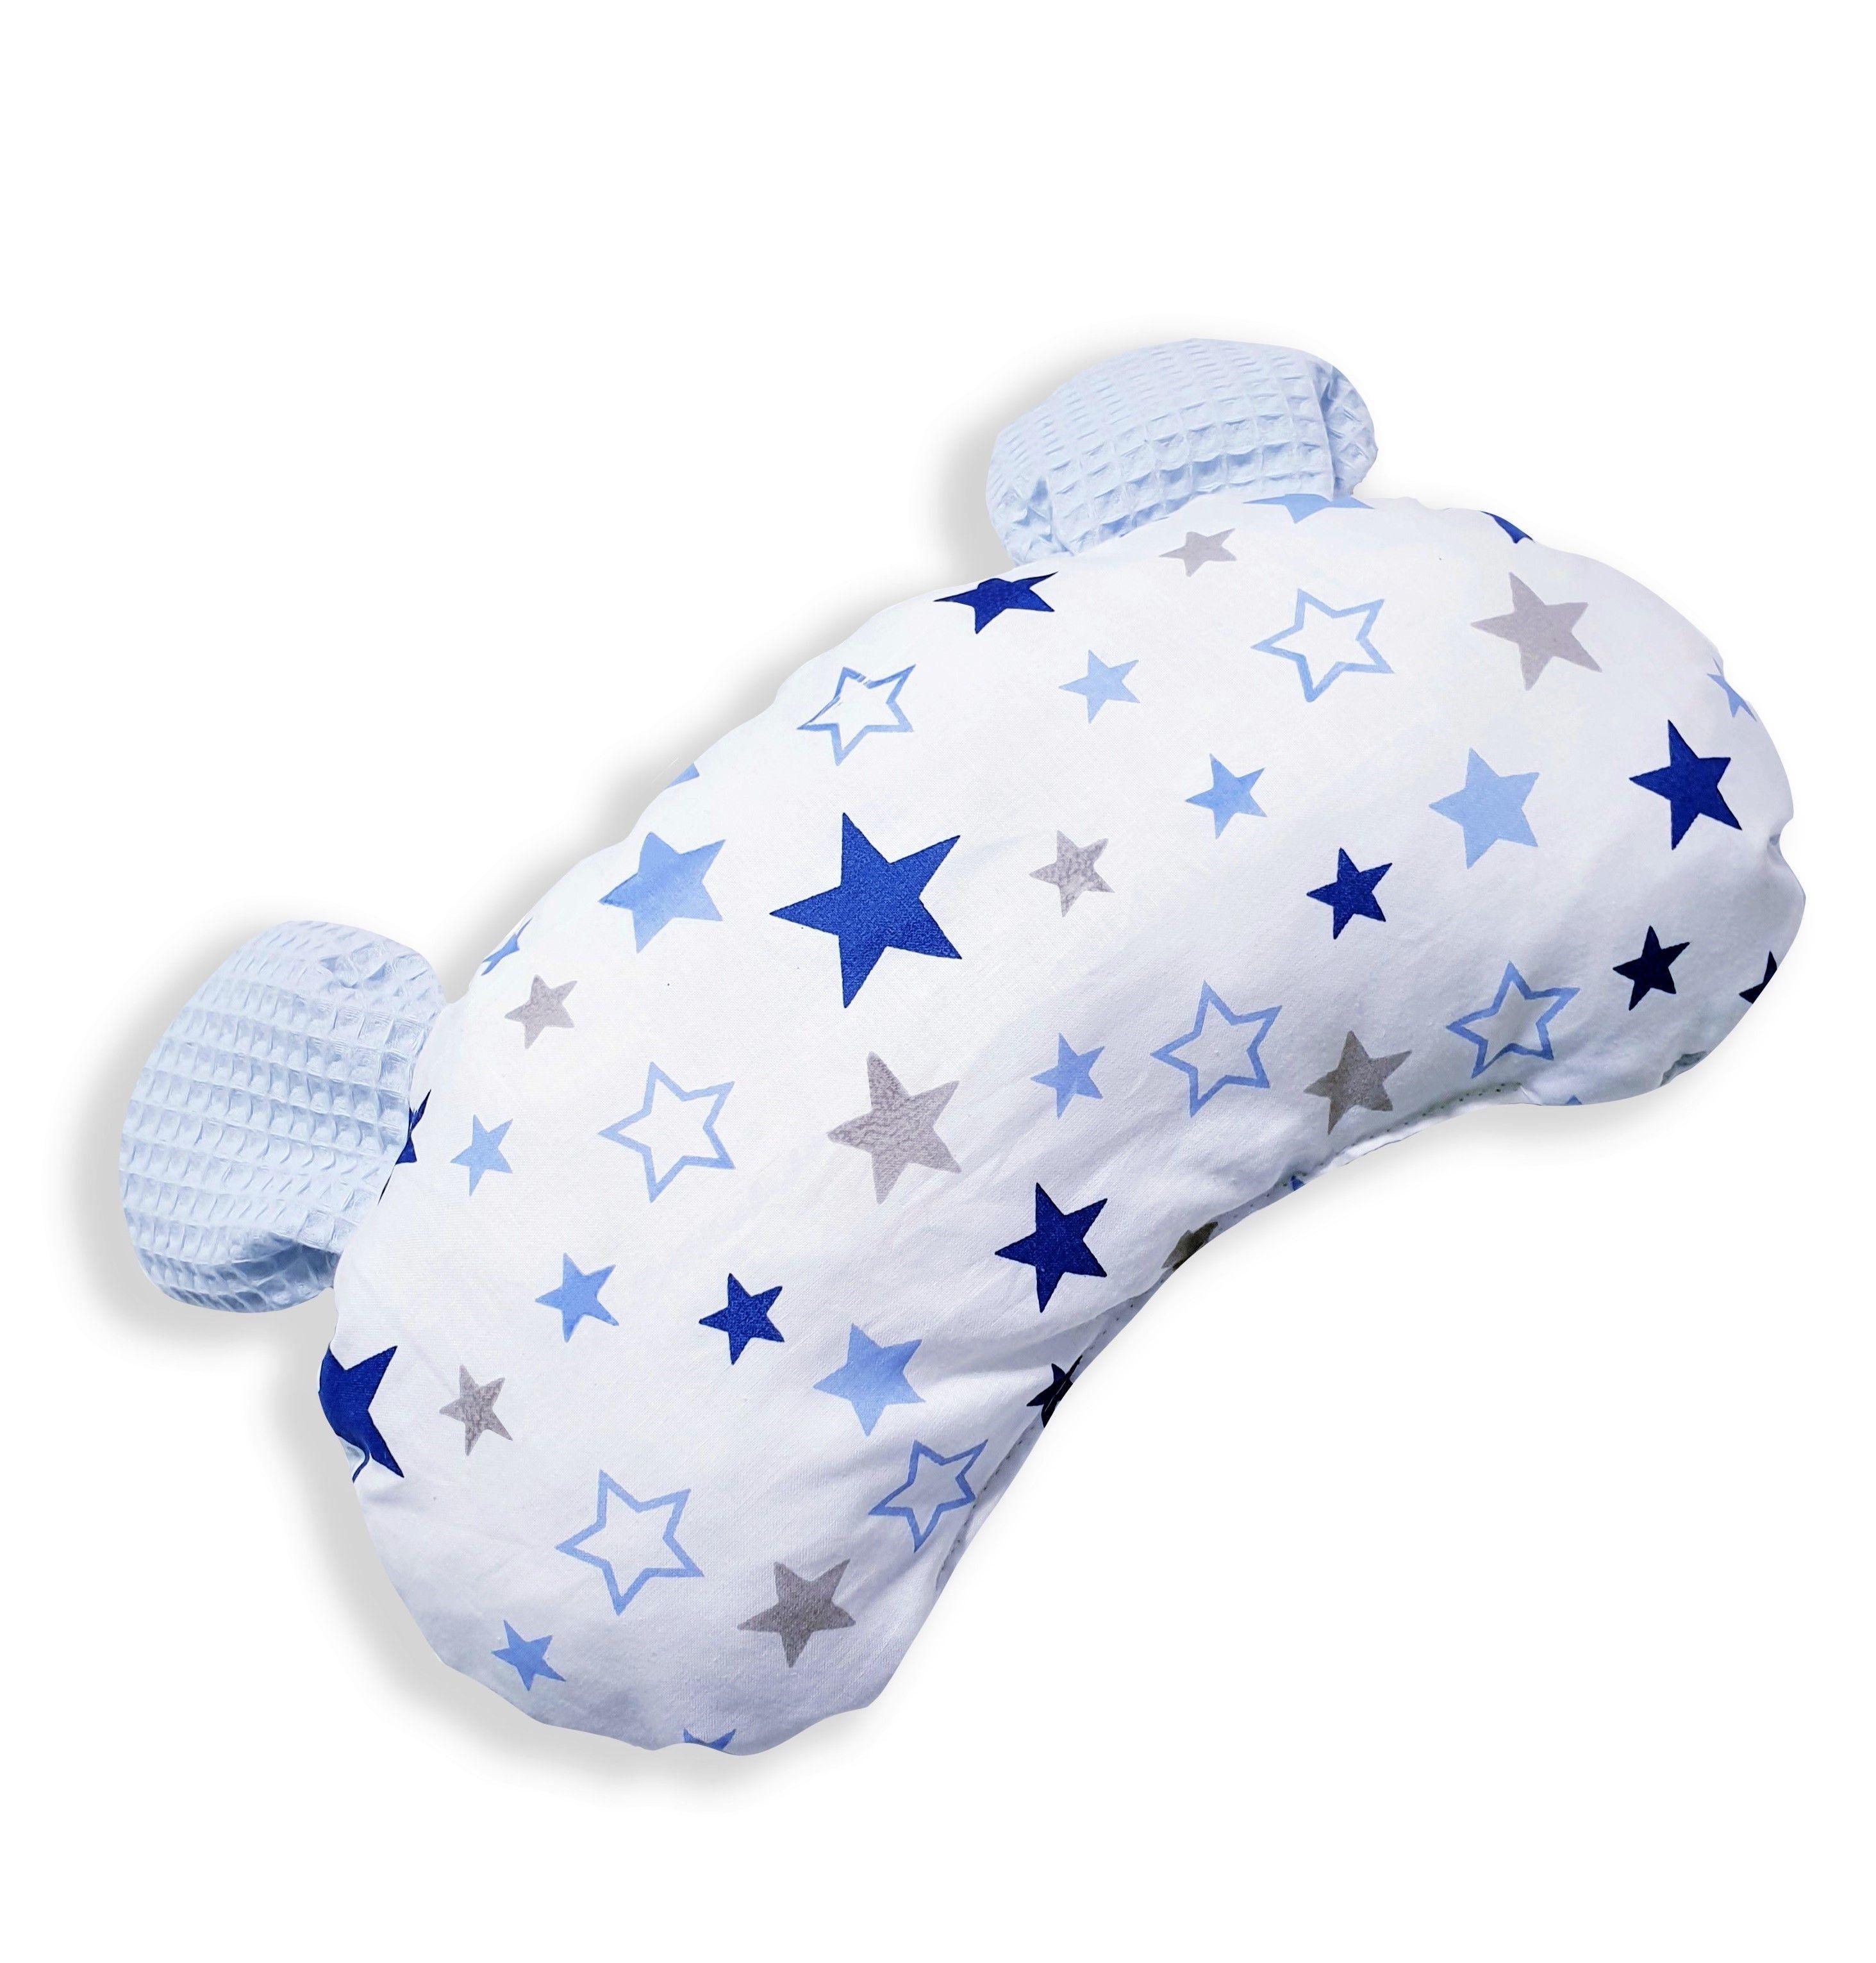 Baby cocoon 6in1 - blue stars, POLISH PRODUCT 100% COTTON